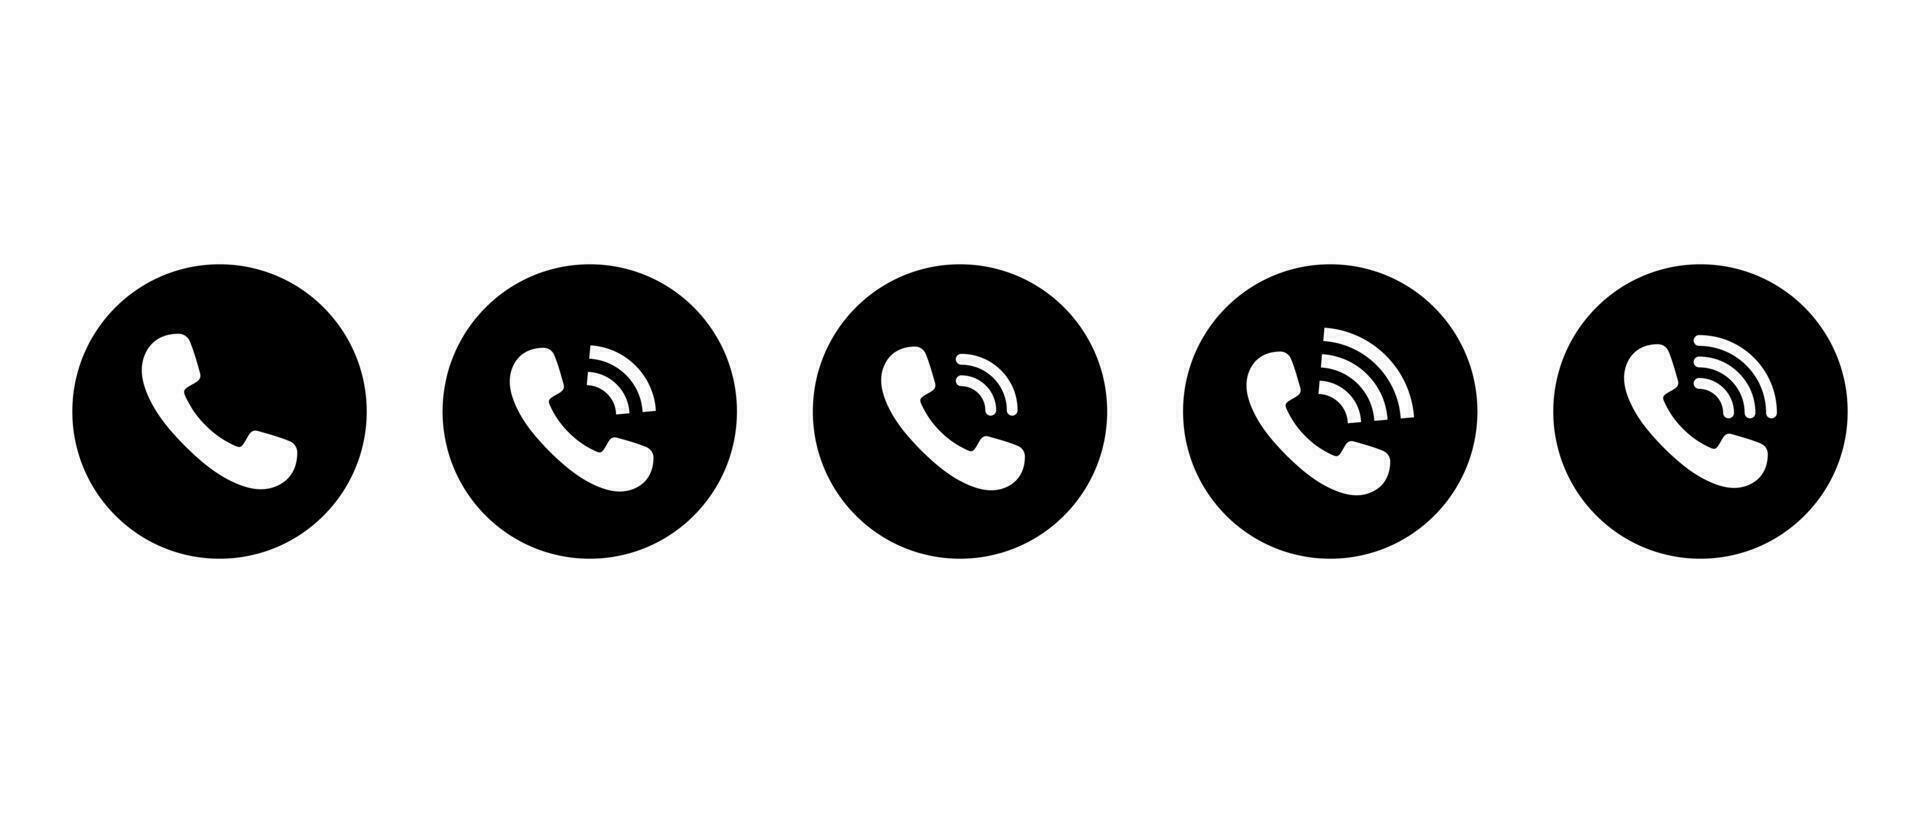 Incoming call button icon vector in black circle. Phone receiver, telephone sign symbol